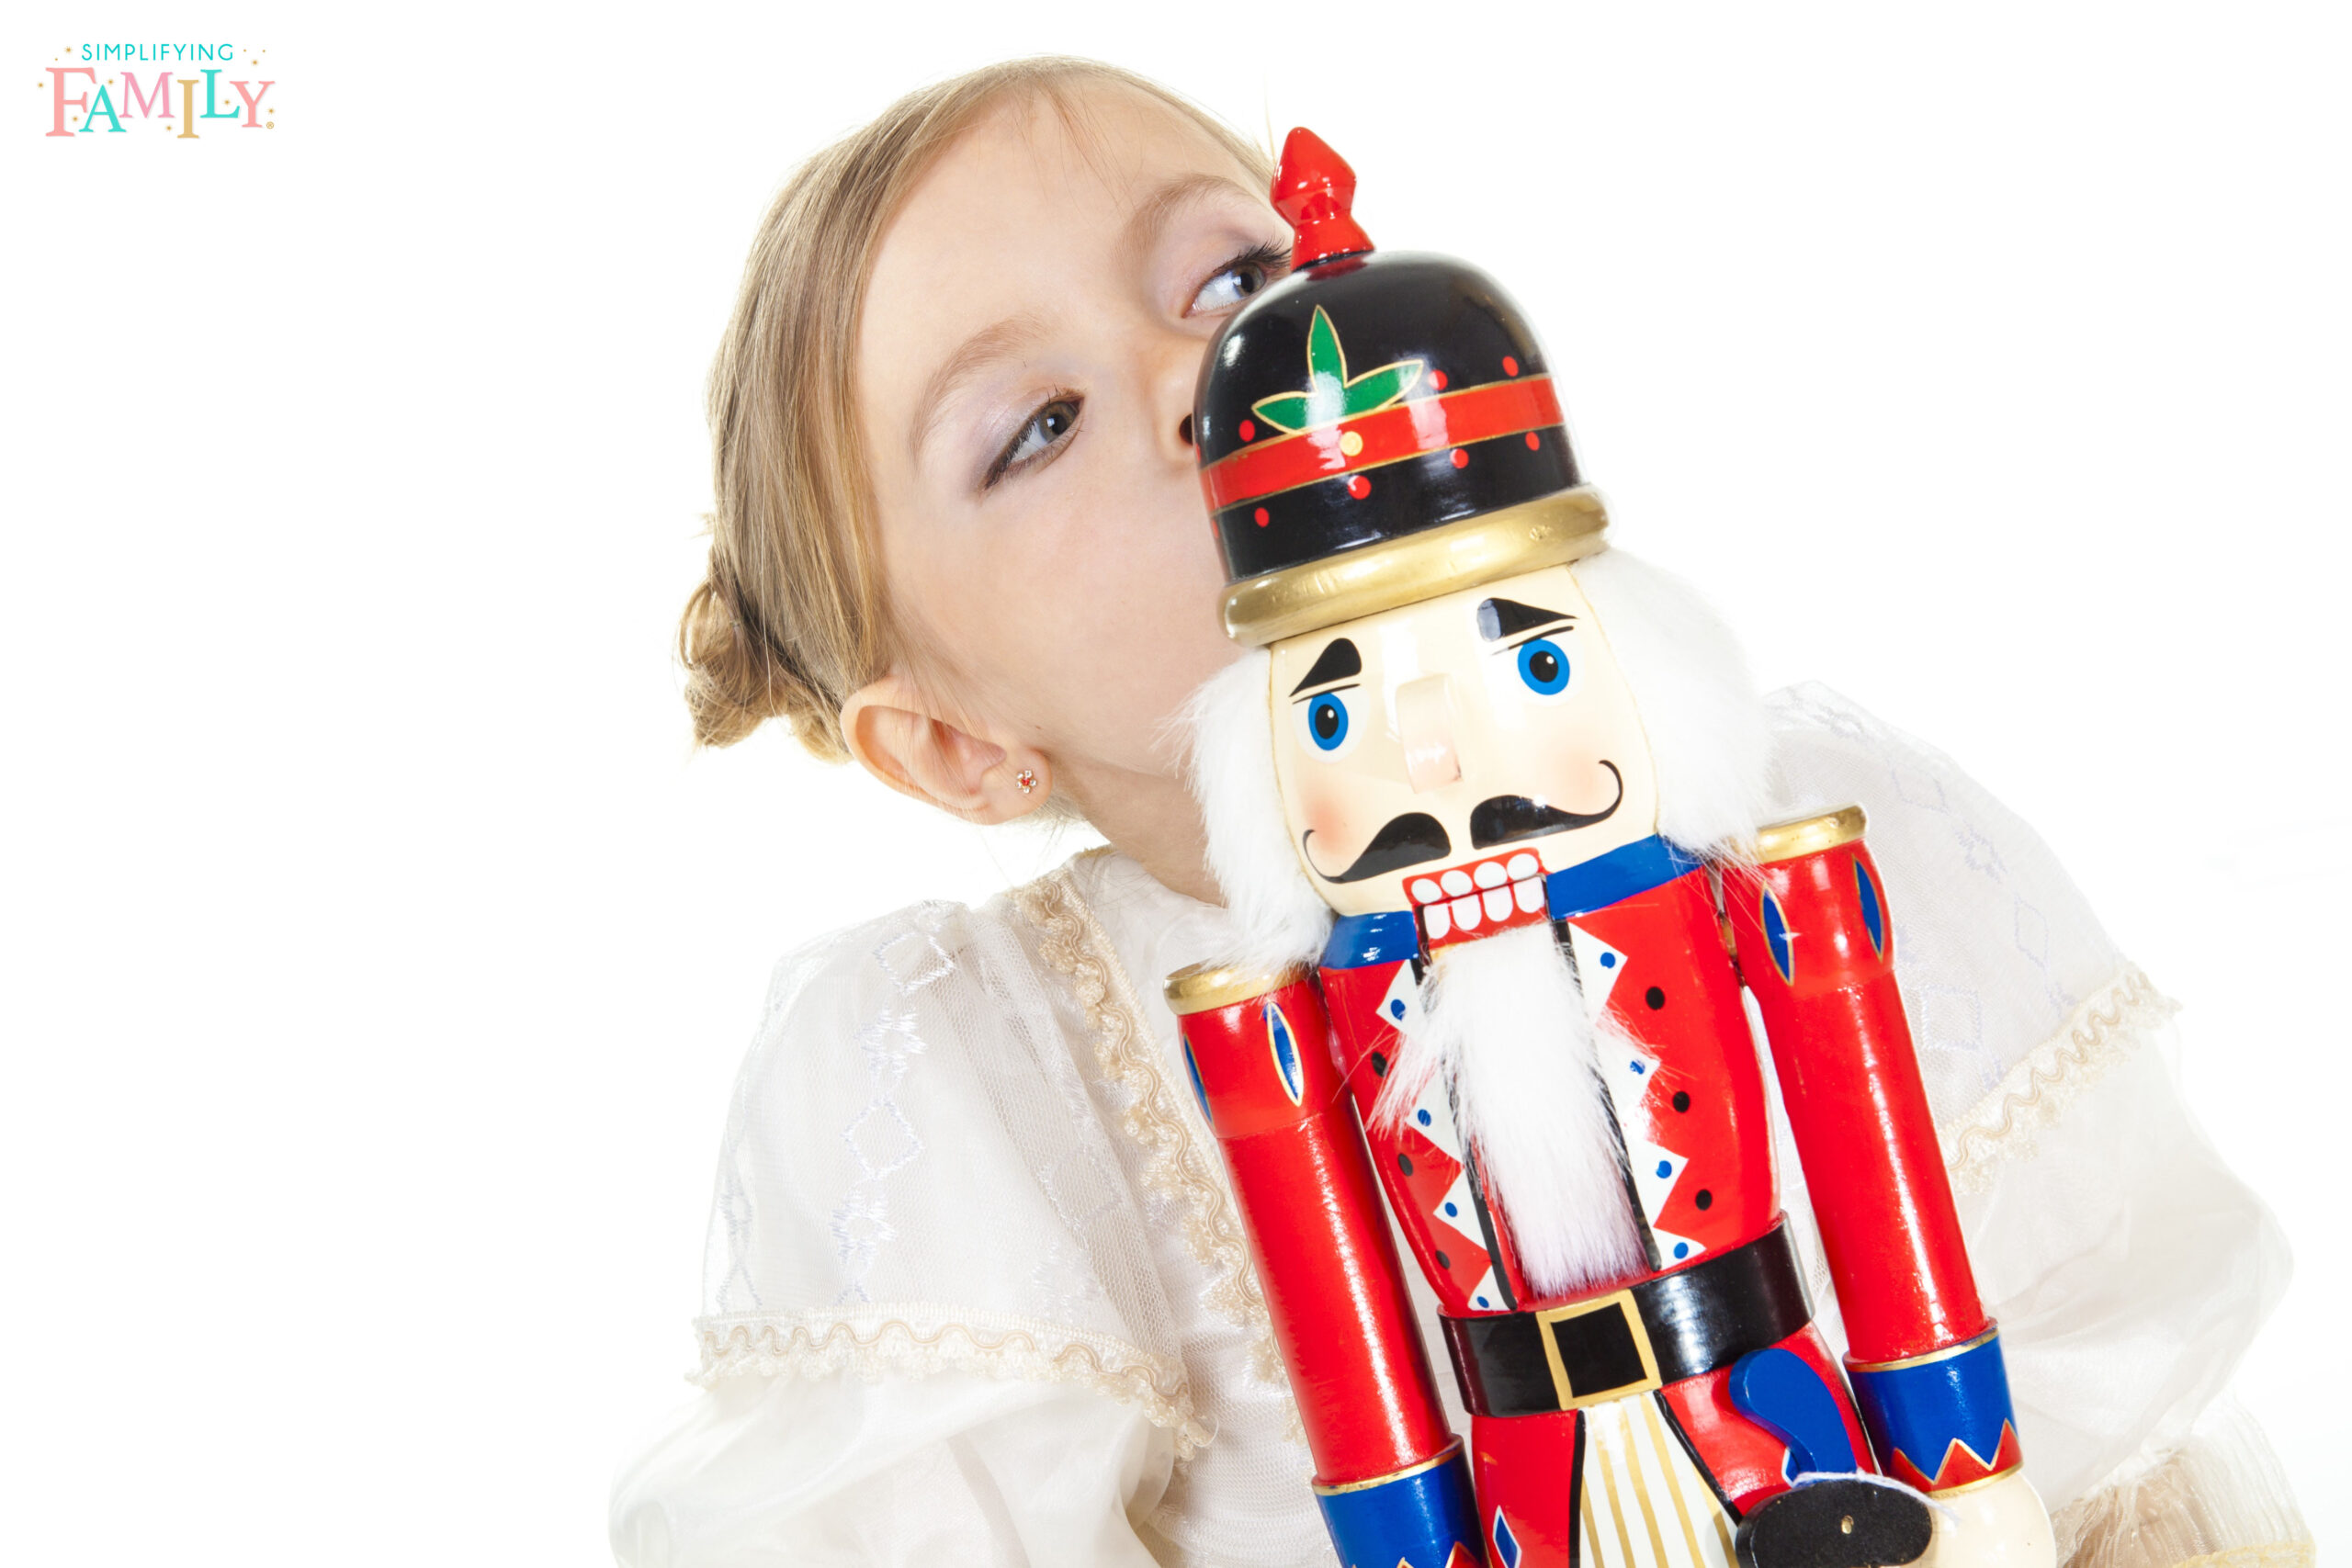 12 Nutcracker Ballet Activities That Are Fun and Educational